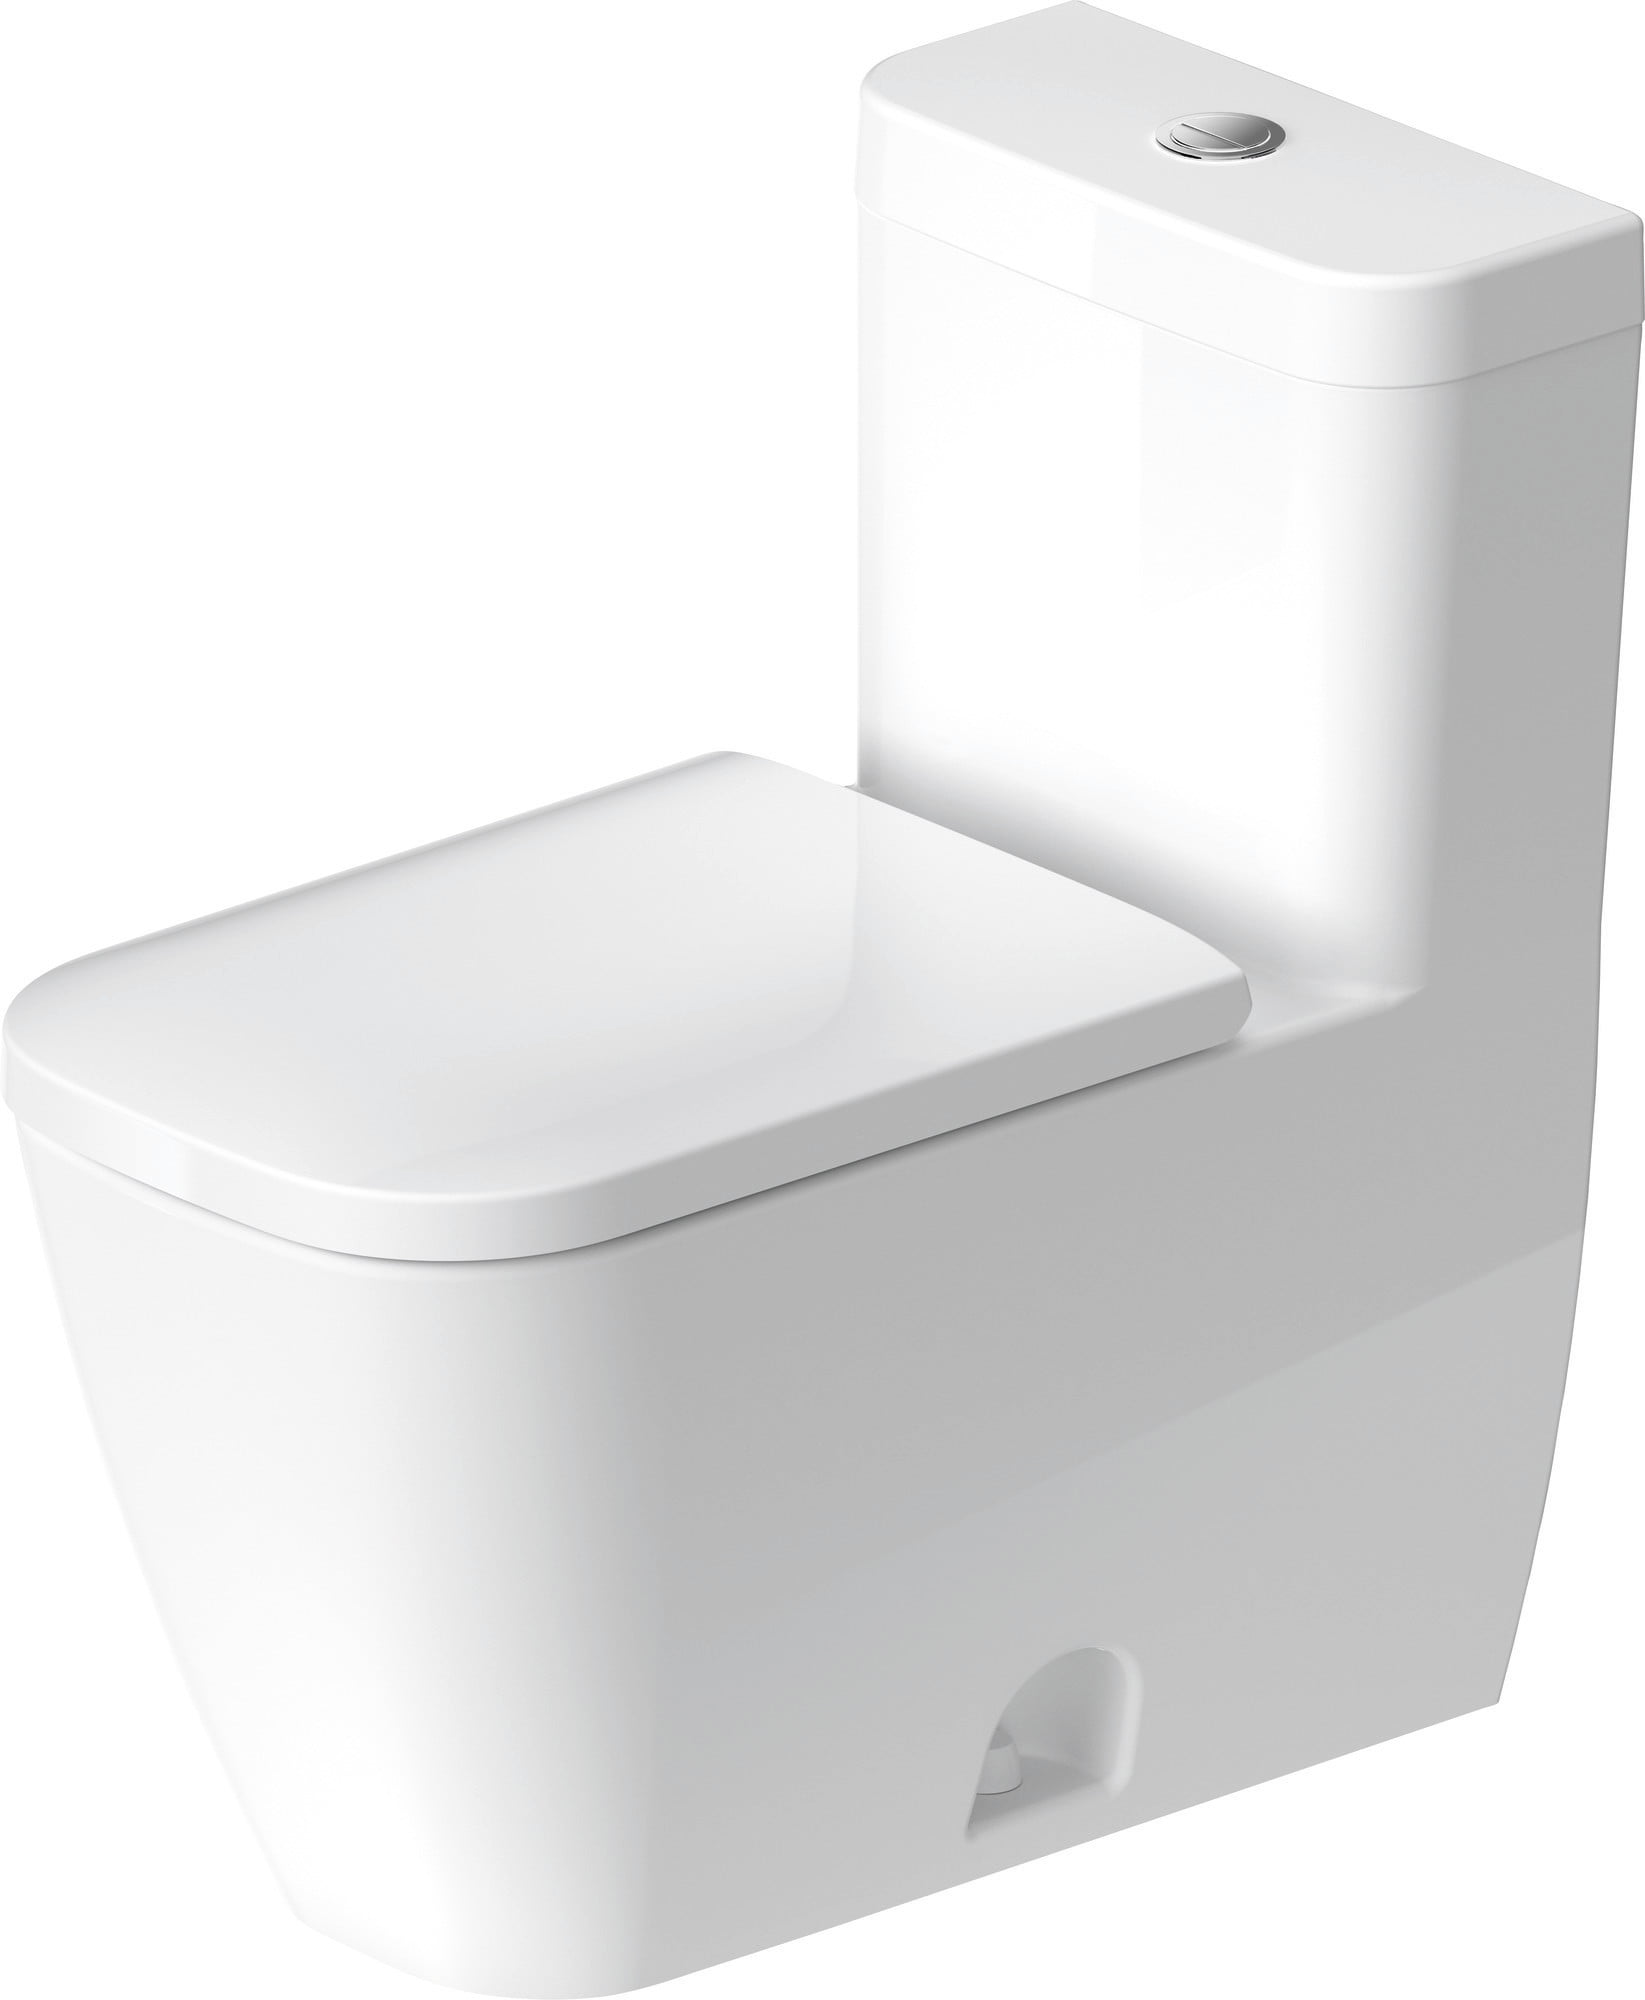 ADA Comfort Height Fiore 33292 One Piece Elongated Toilet w/ Soft Close Seat 